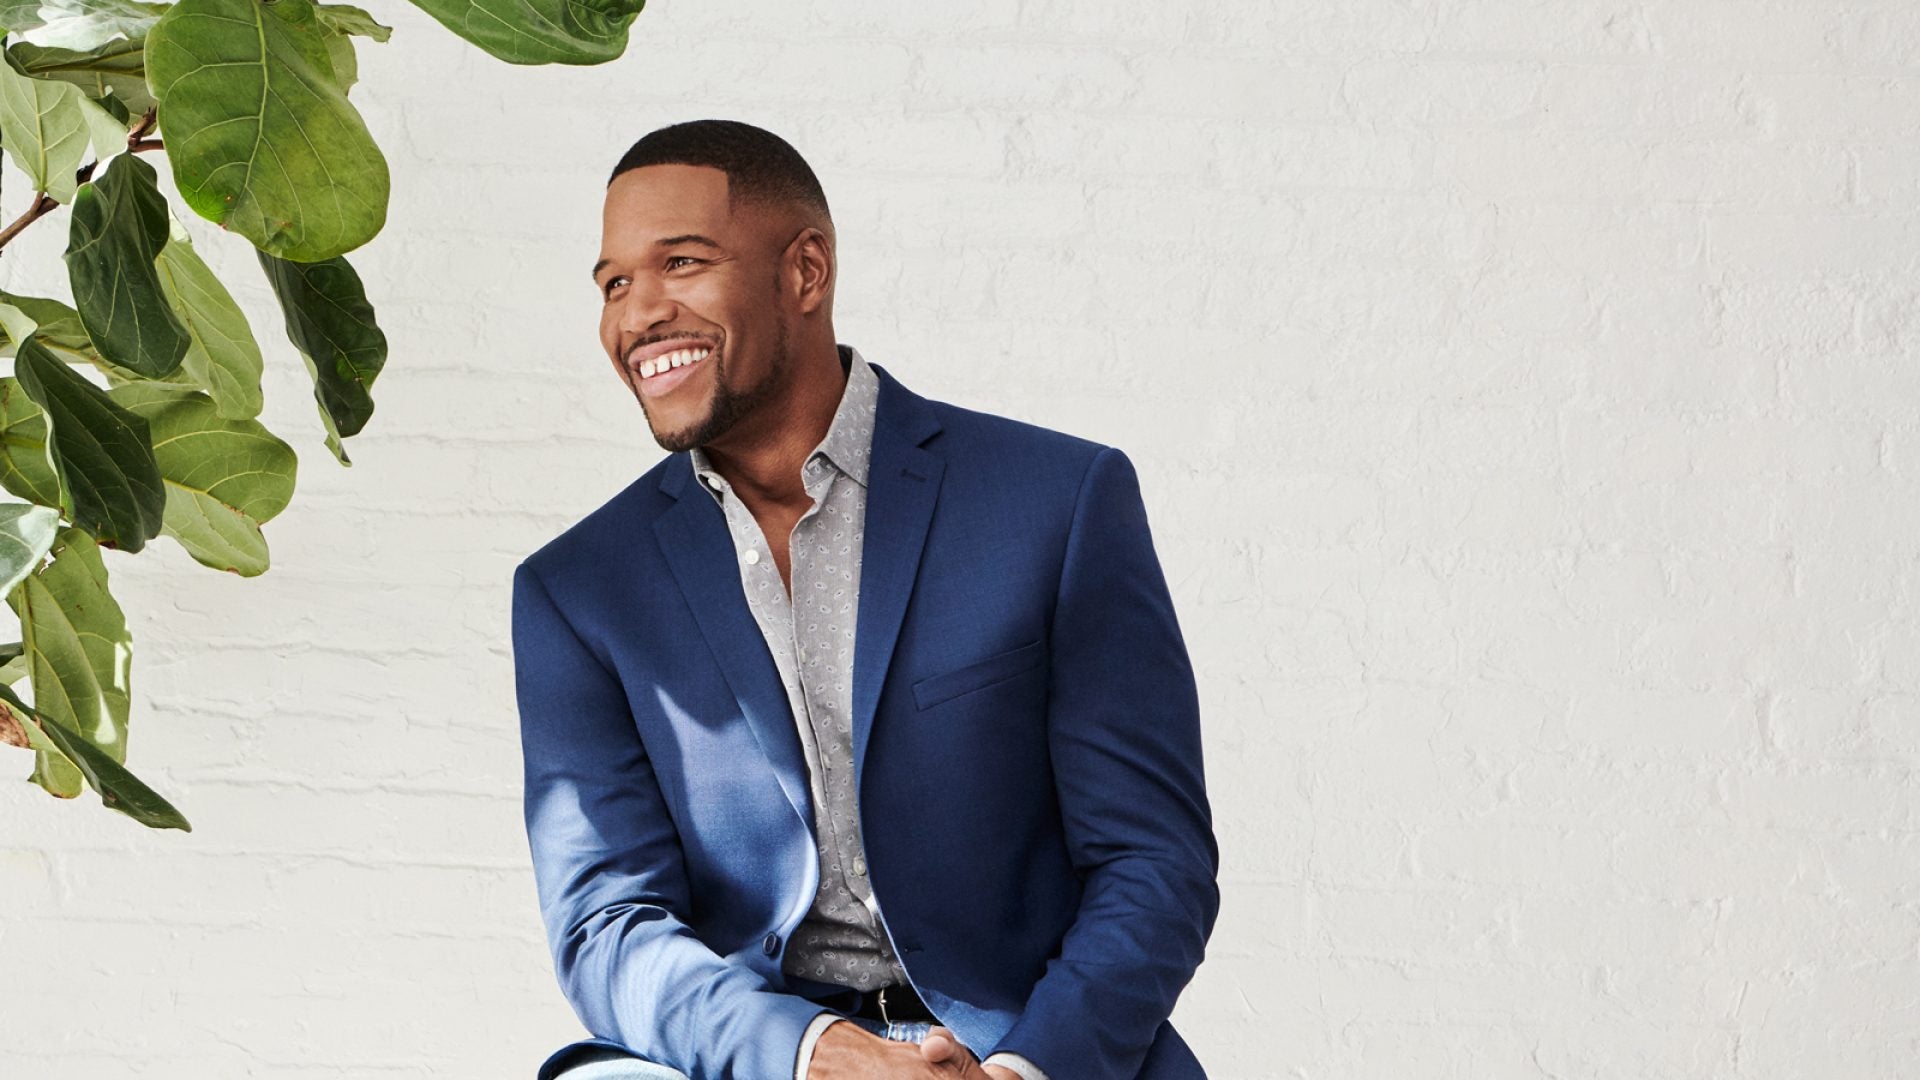 Michael Strahan Partners With Men's Warehouse To Distribute His Latest Collection